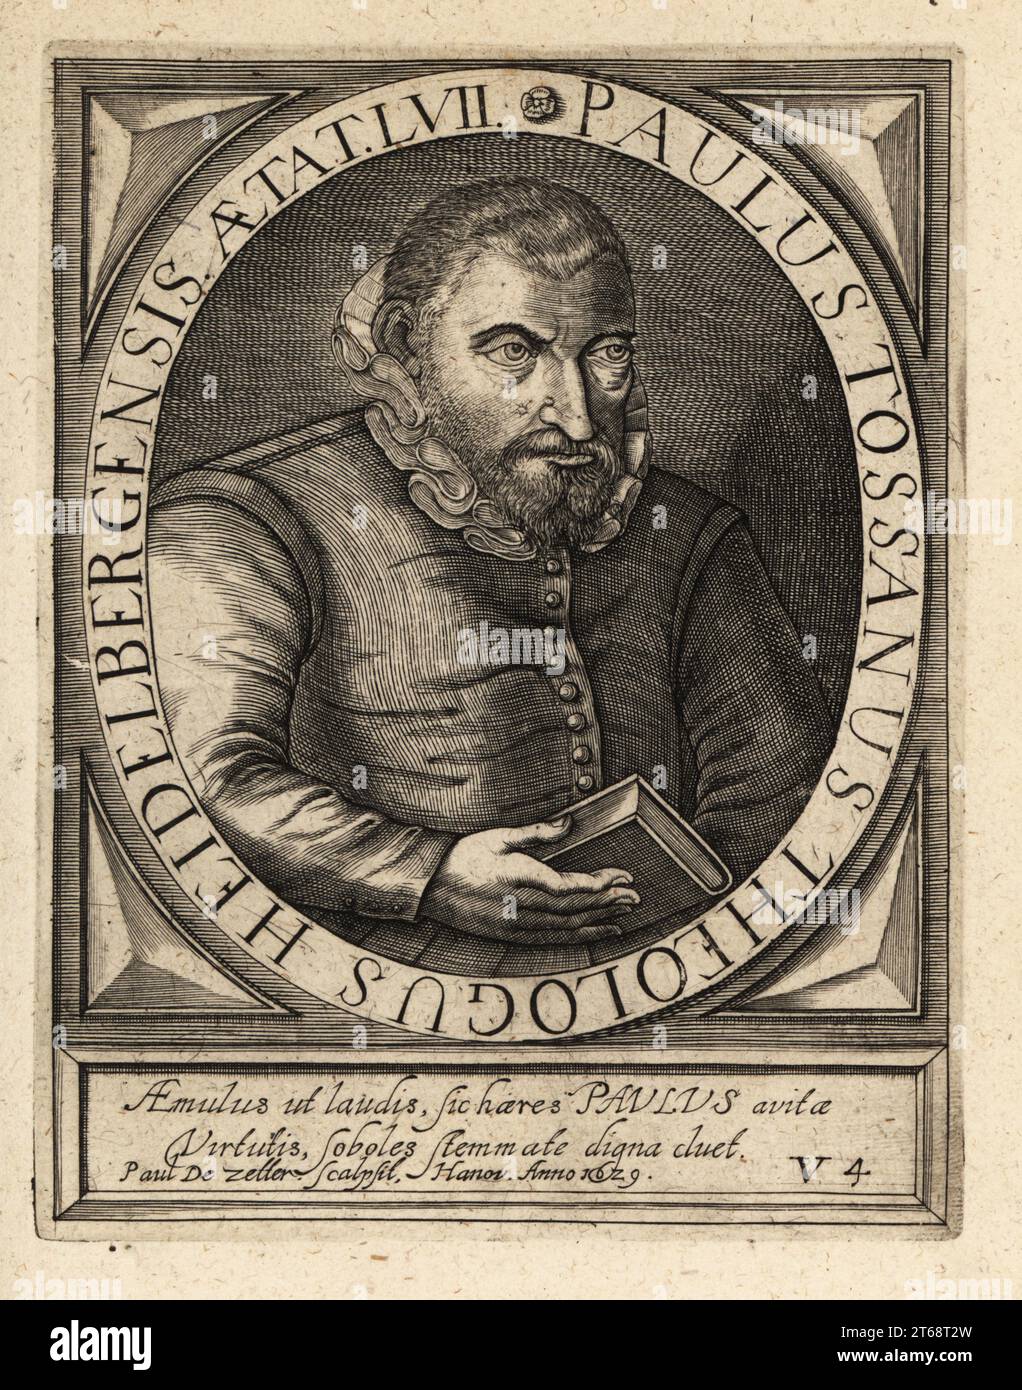 Paul Toussain, 1572-1634, Huguenot minister and theologian of Heidelberg, at age 57. Paulus Tossanus Theologus Heidelbergensis Aetat LVII. Copperplate engraving by Johann Theodore de Bry from Jean-Jacques Boissards Bibliotheca Chalcographica, Johann Ammonius, Frankfurt, 1650. Stock Photo